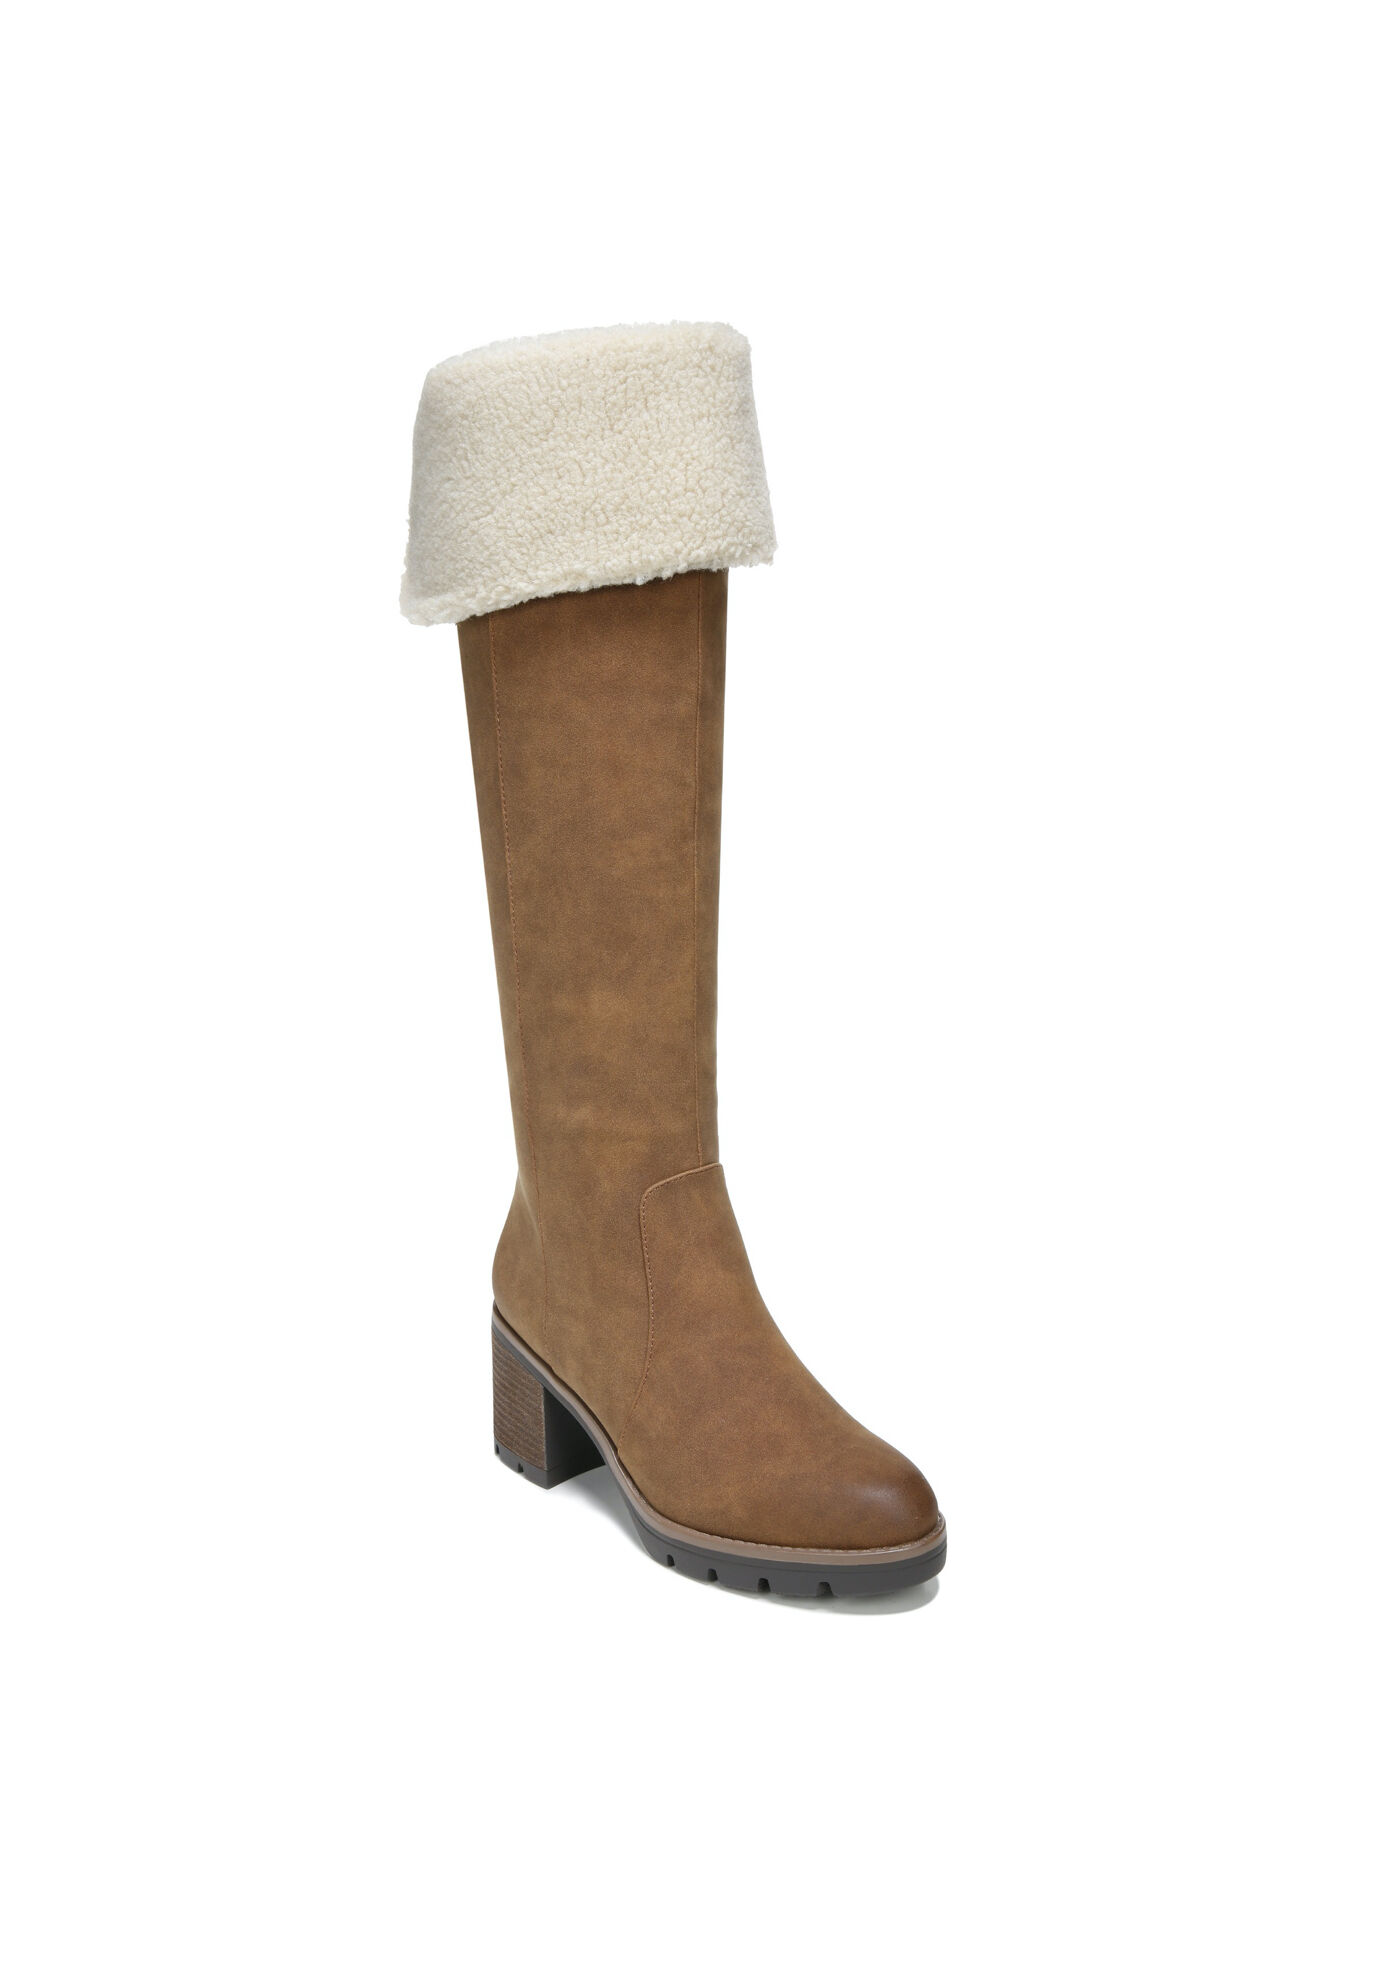 Women's Myfave Water Repllent Tall Boot by Roamans in Mid Brown (Size 11 M)